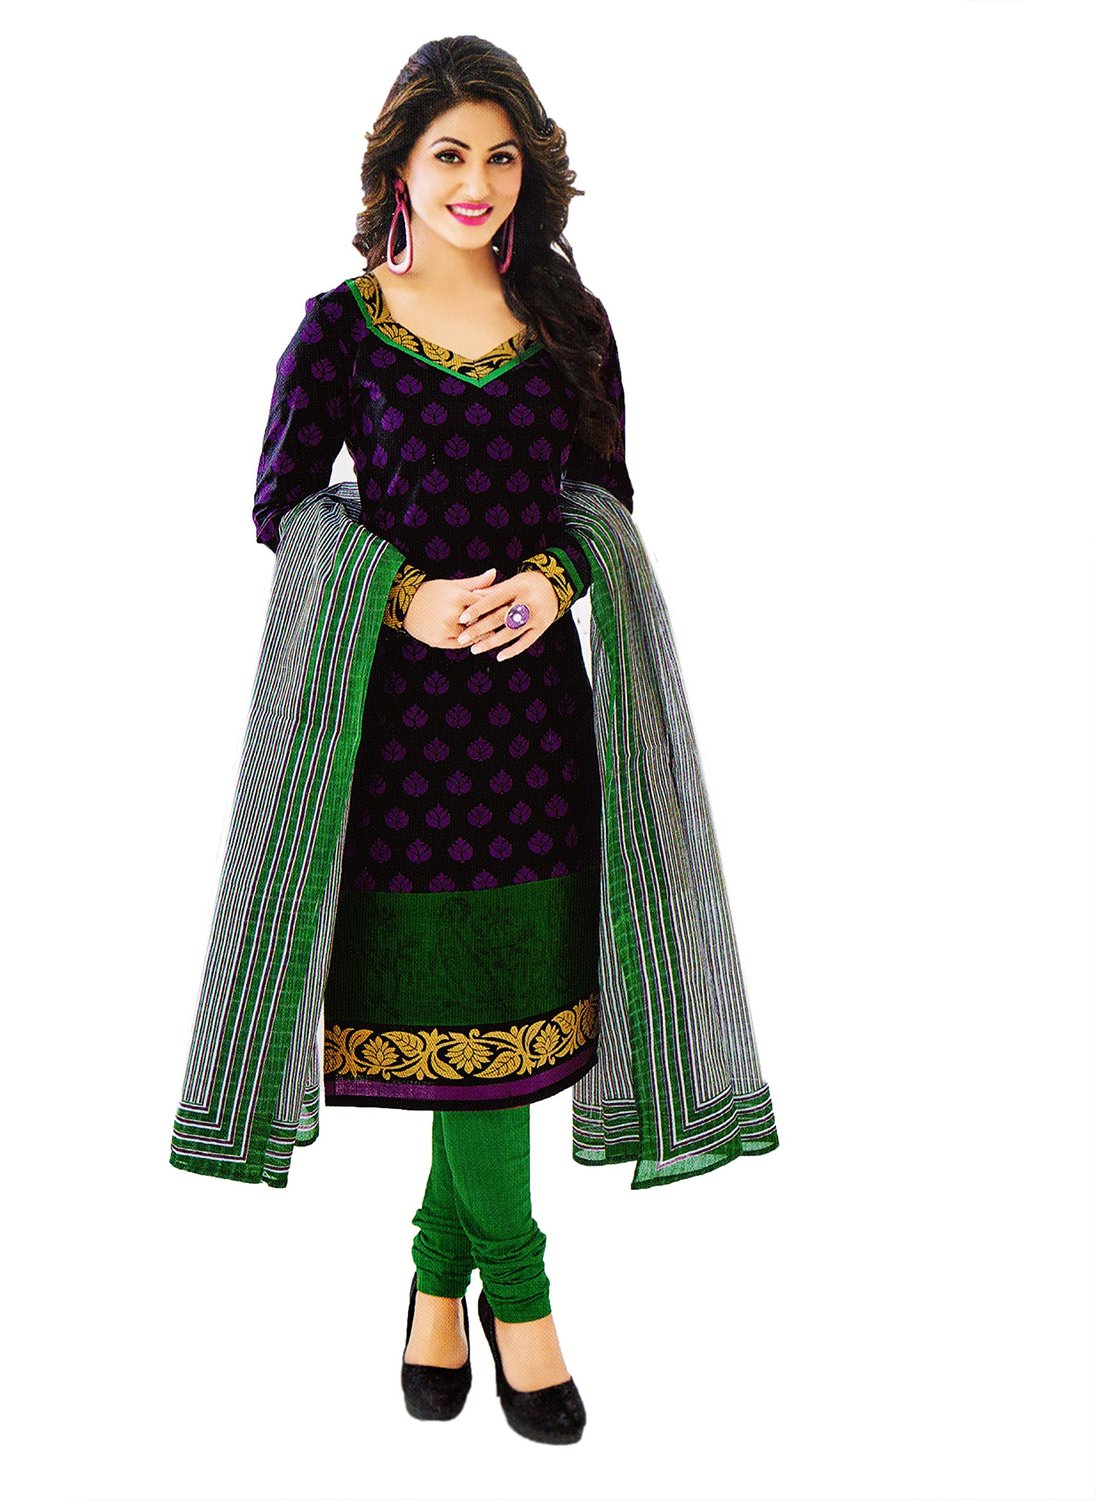 Buy Chudidar Suit for Women (Unstitched) Online @ ₹999 from ShopClues